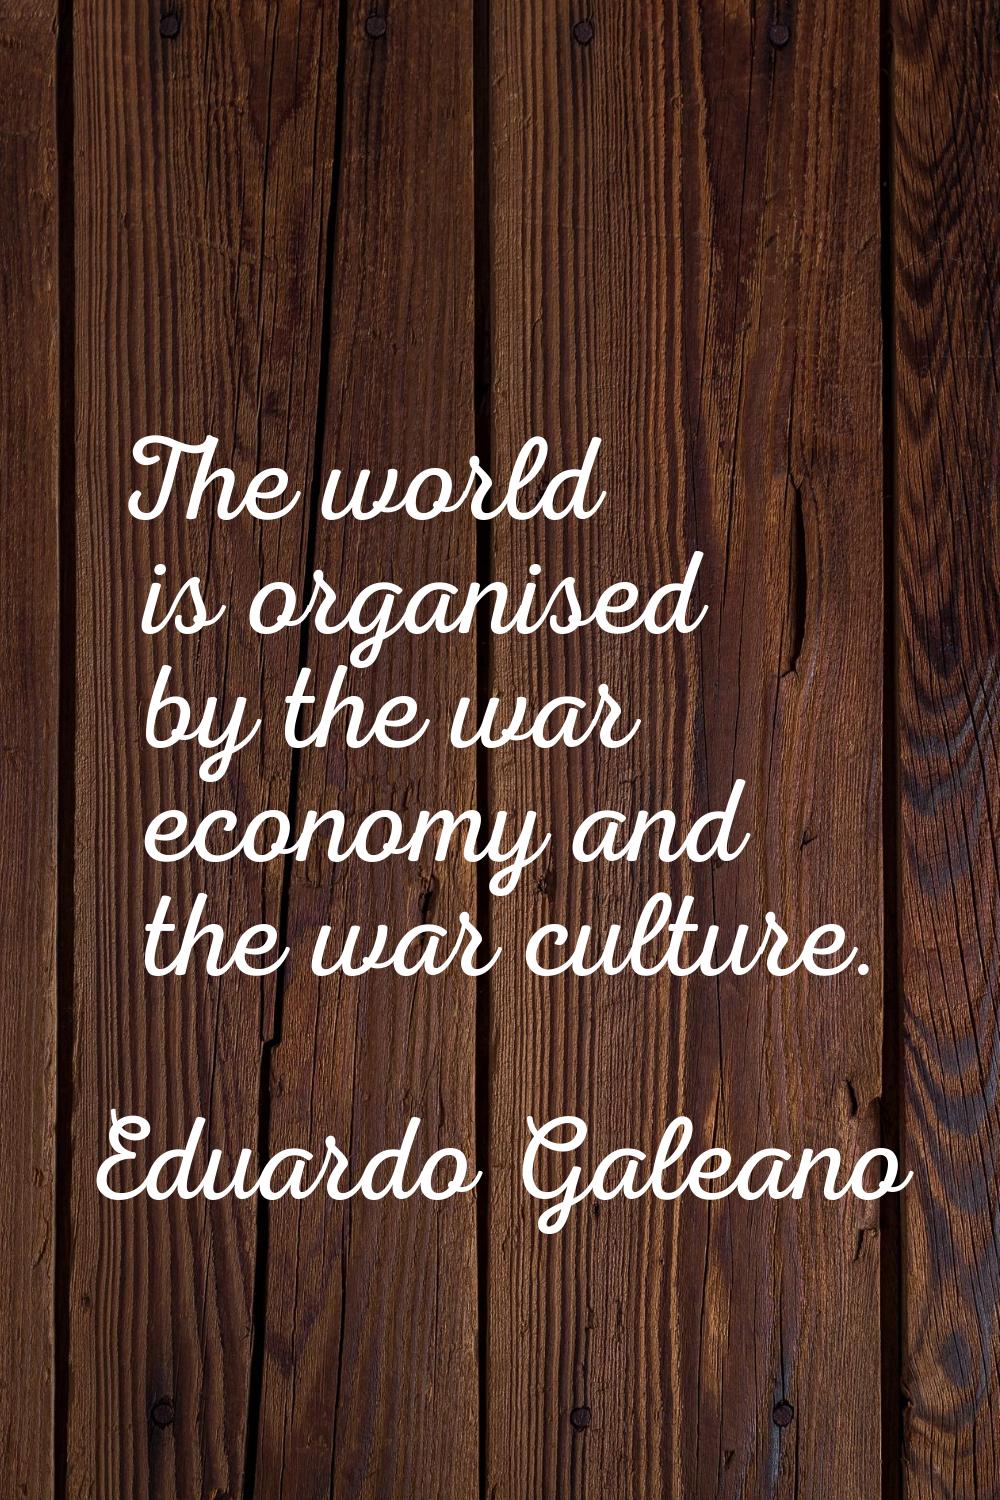 The world is organised by the war economy and the war culture.